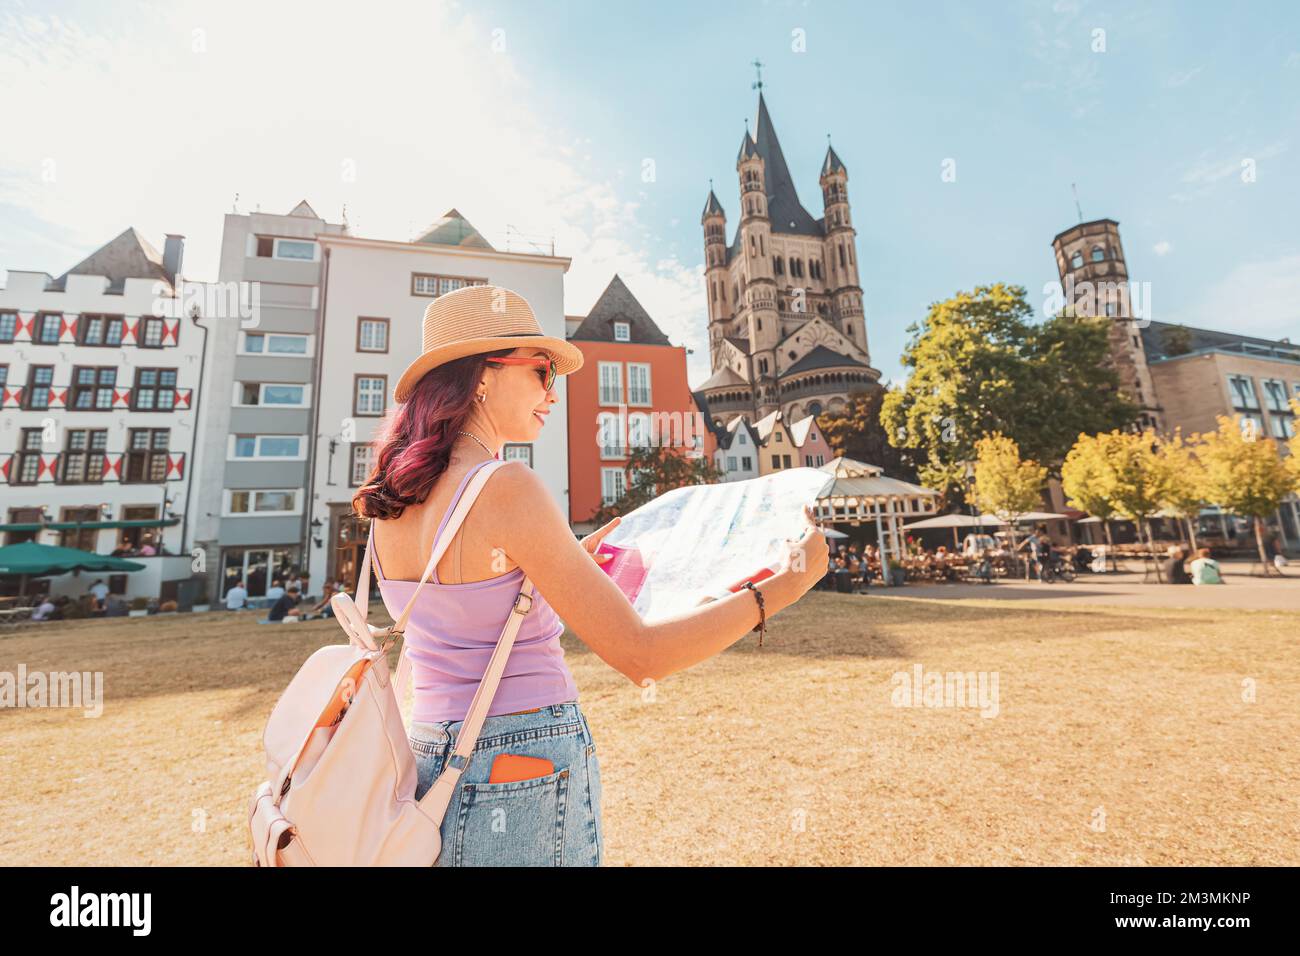 Happy tourist girl with maps, navigating and geolocating on the streets of an old European city of Koln Stock Photo